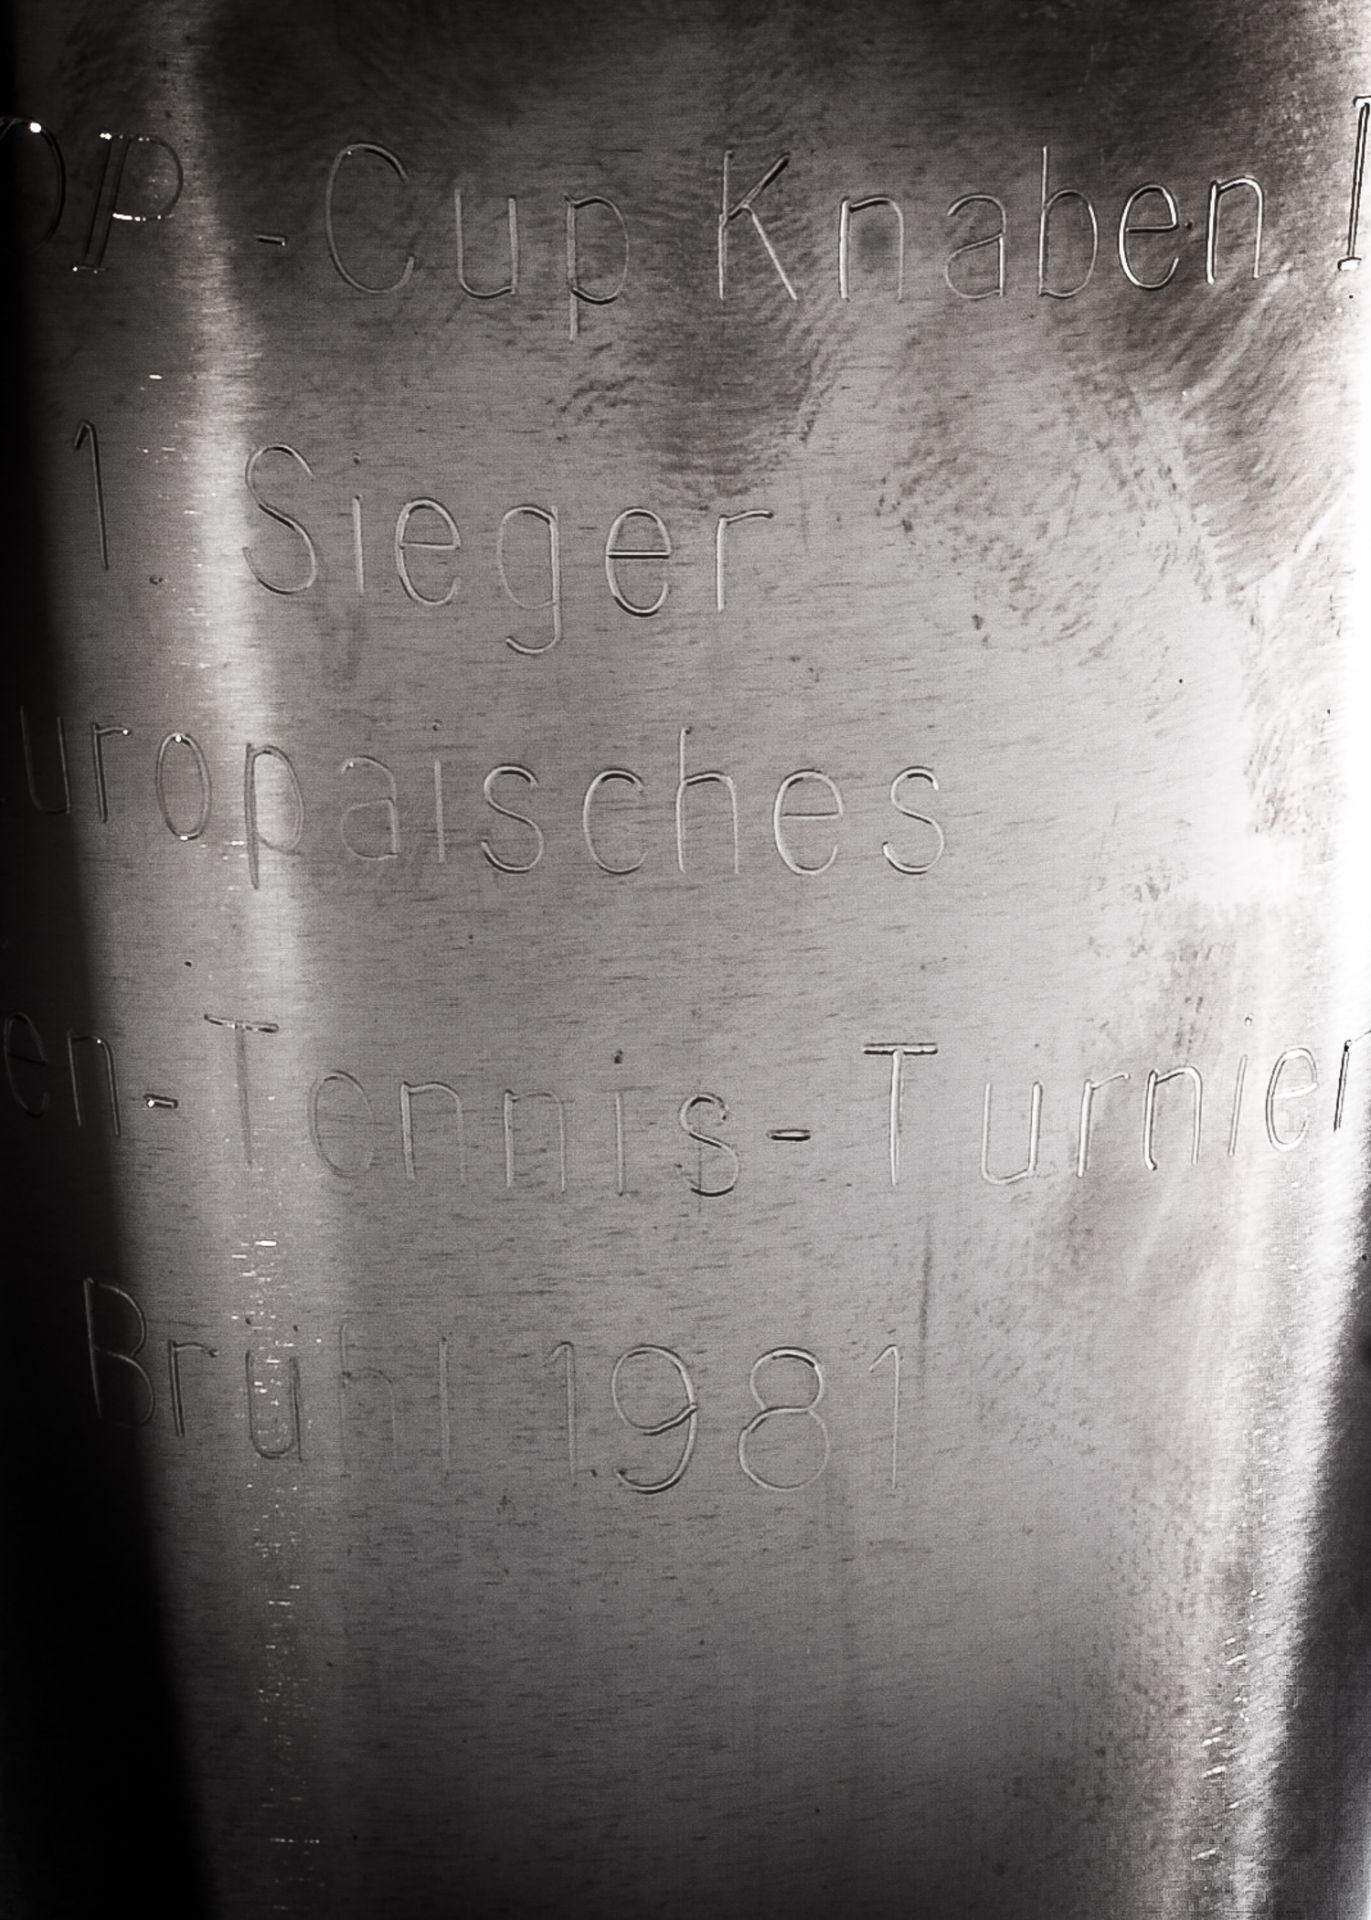 A Metal Tumbler 115mm tall bearing the inscribed words Dunlop Cup Knaben I 1. Seiger Europaisches - Image 3 of 3